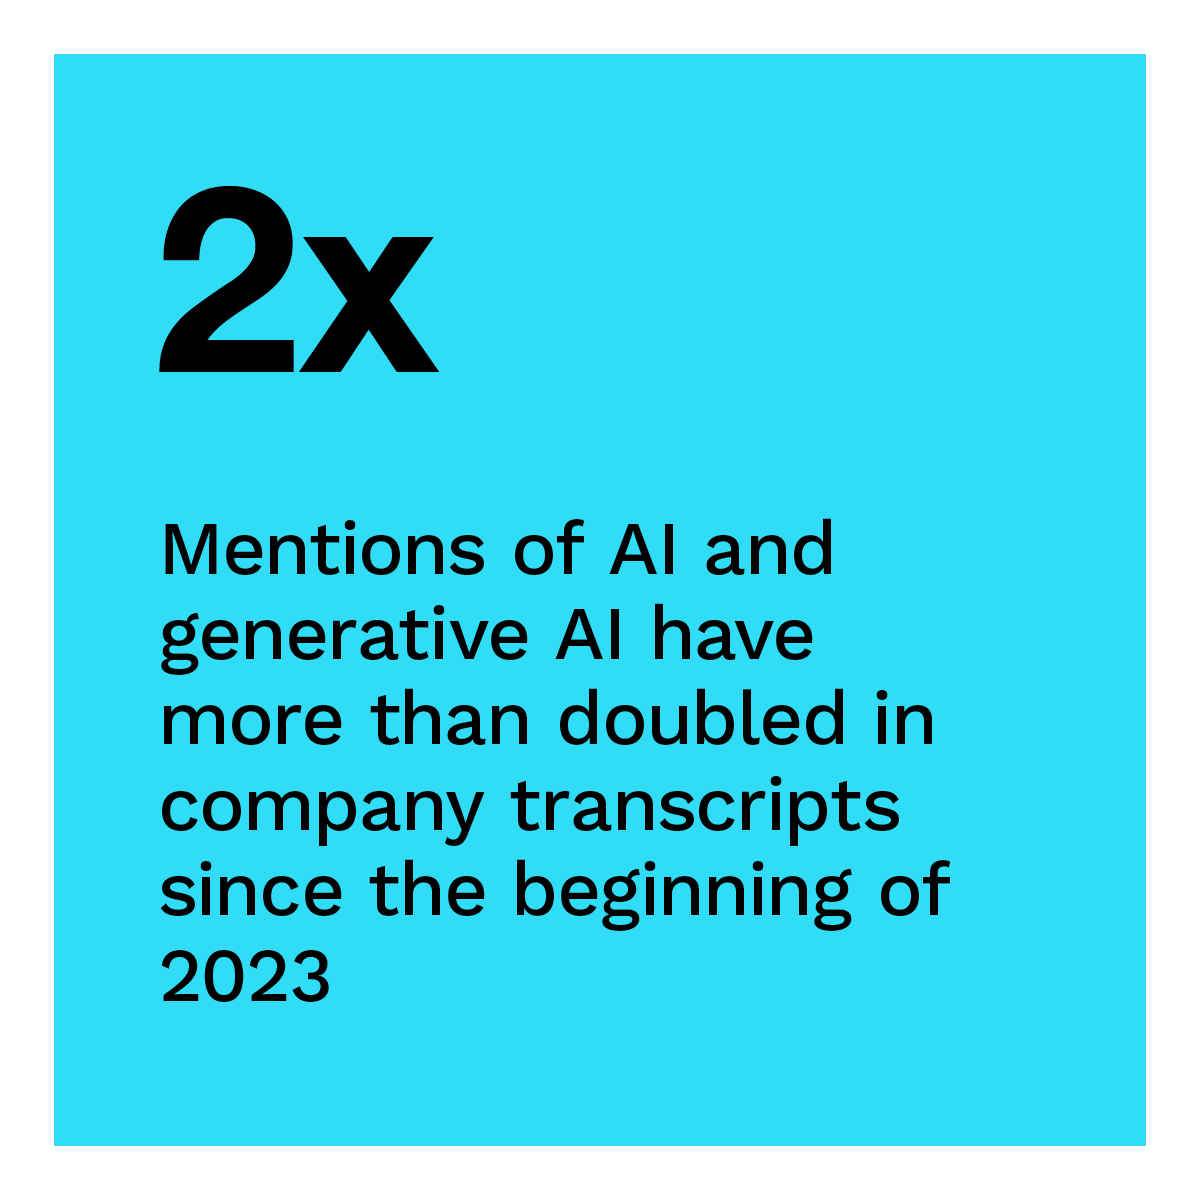 2x: Mentions of AI and generative AI have more than doubled in company transcripts since the beginning of 2023